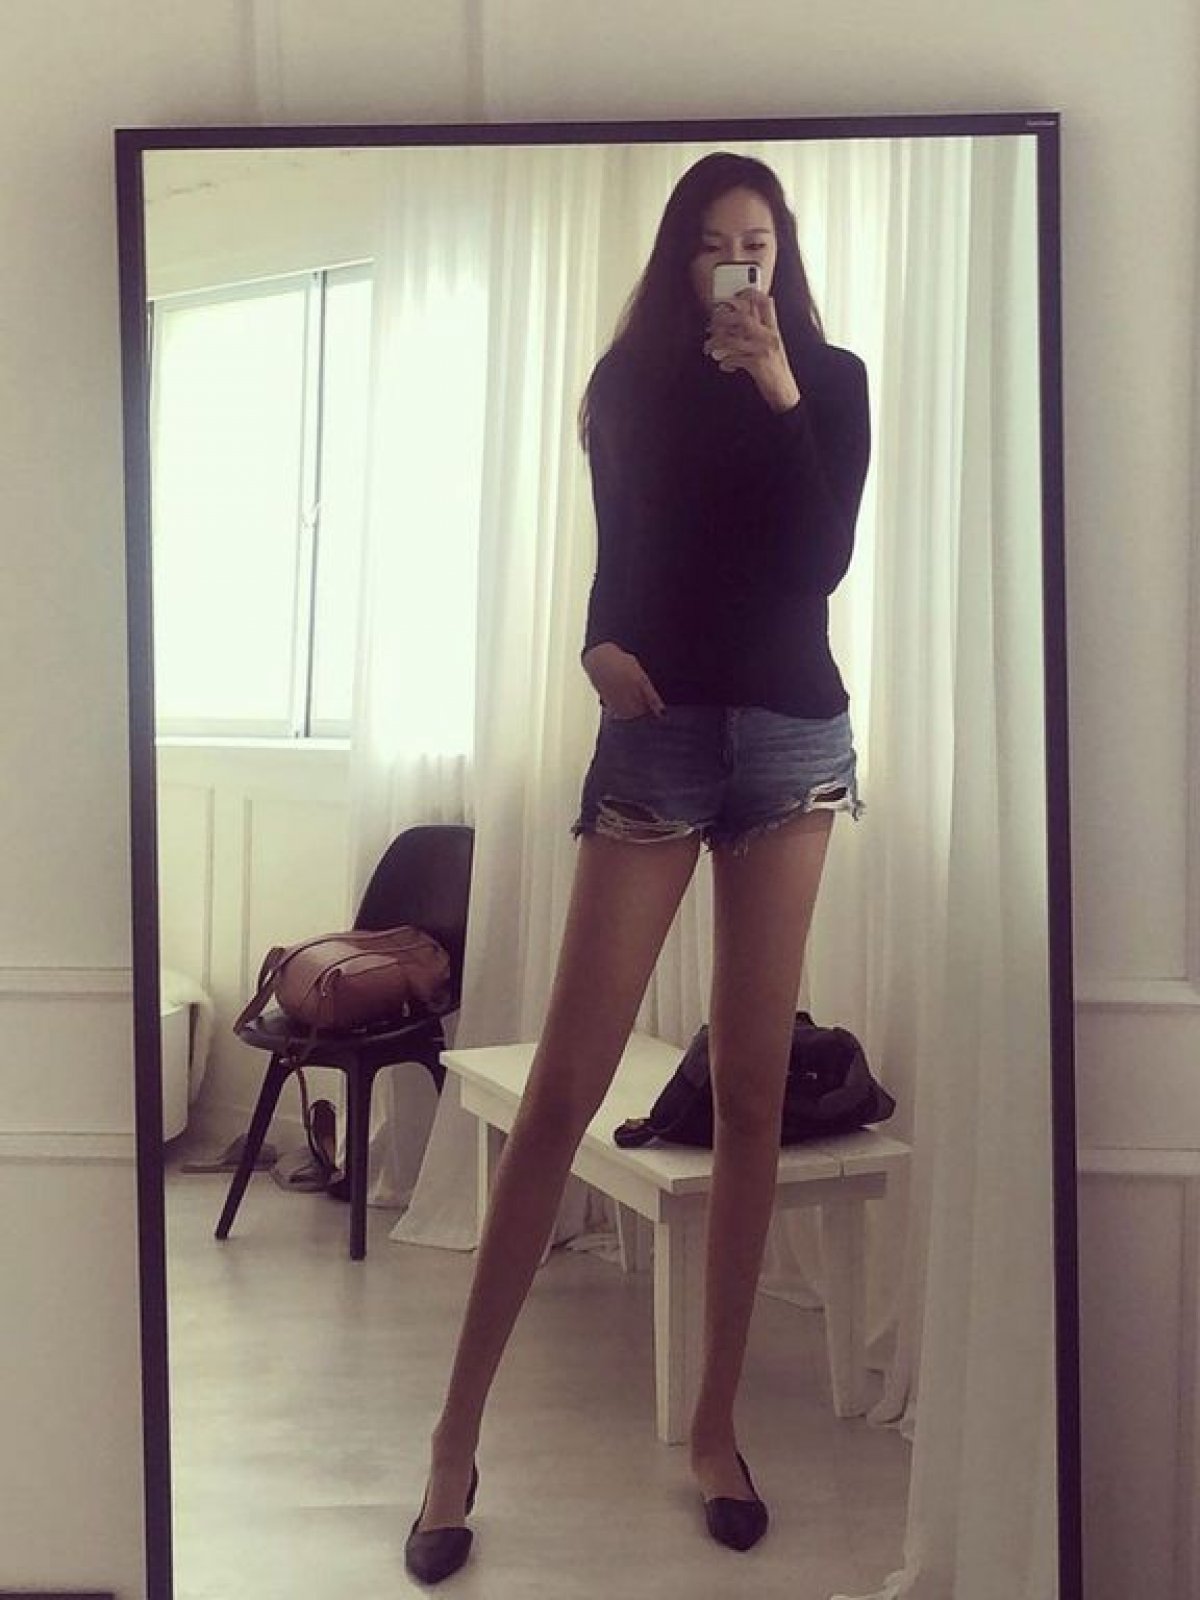 Meet the World's Tallest Fashion Model, Whose Legs are Taller Than an  Entire 4th-Grader